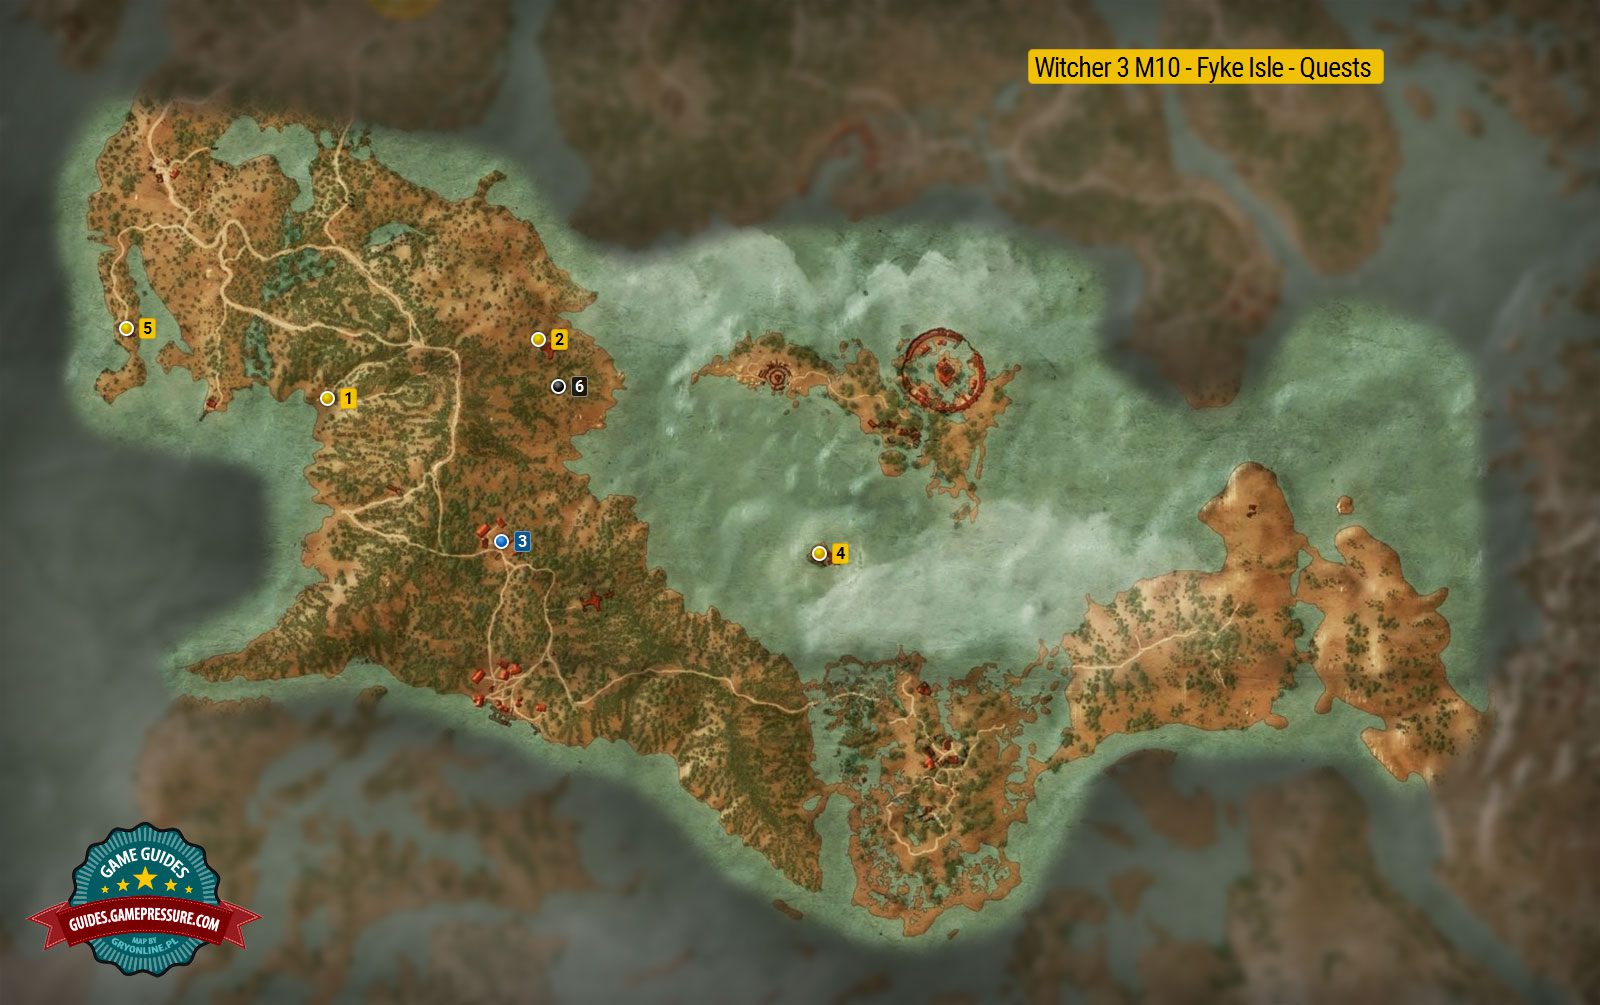 Witcher 3 M10 - Fyke Isle - Quests